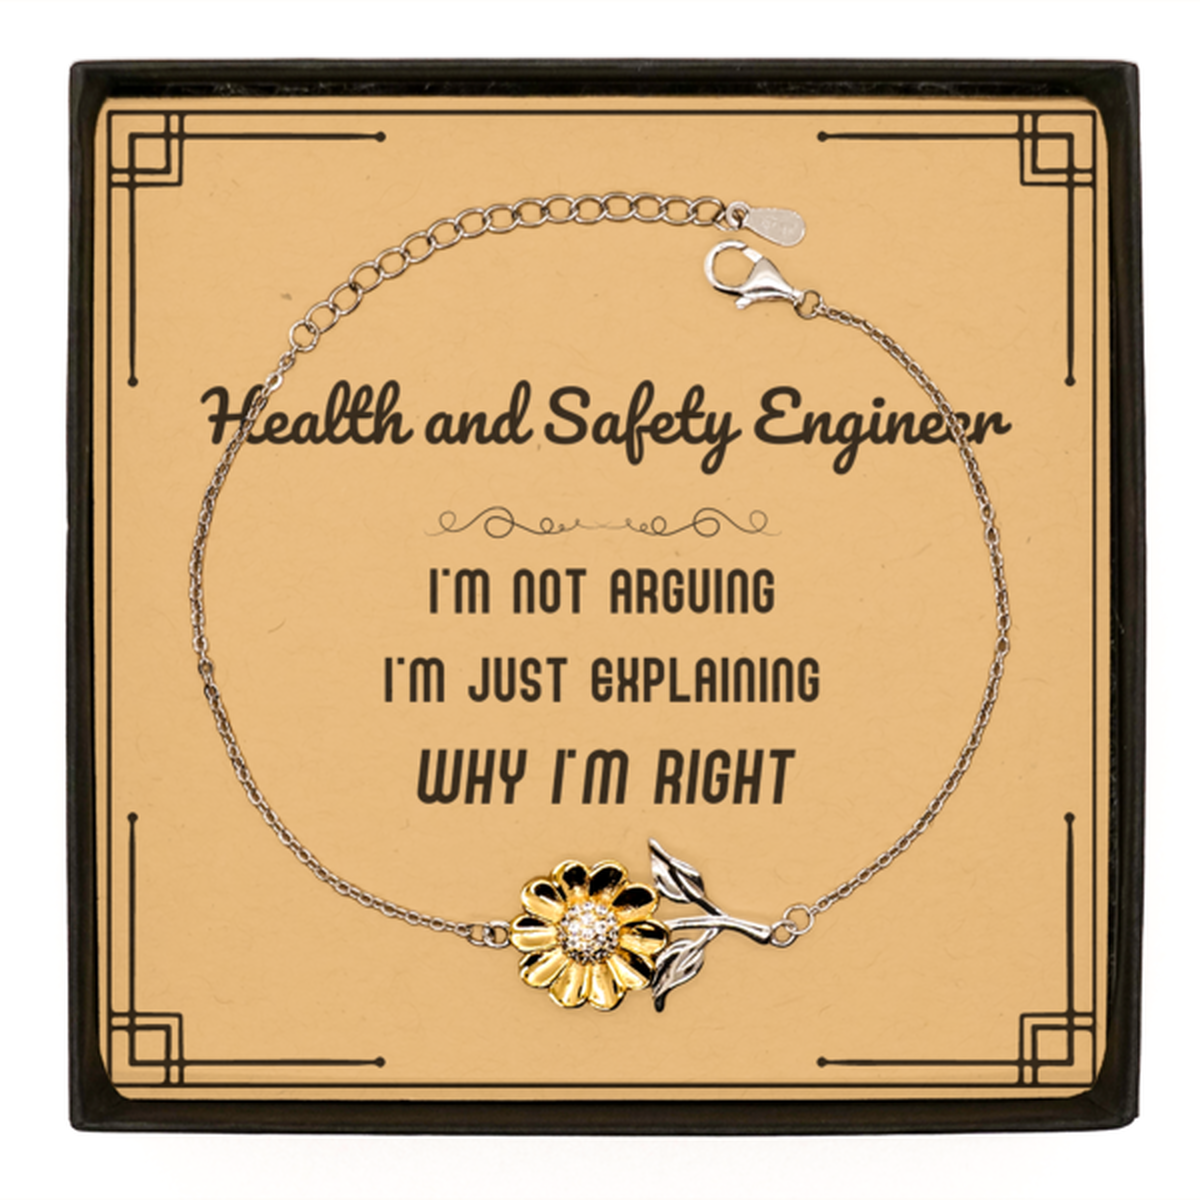 Health and Safety Engineer I'm not Arguing. I'm Just Explaining Why I'm RIGHT Sunflower Bracelet, Funny Saying Quote Health and Safety Engineer Gifts For Health and Safety Engineer Message Card Graduation Birthday Christmas Gifts for Men Women Coworker